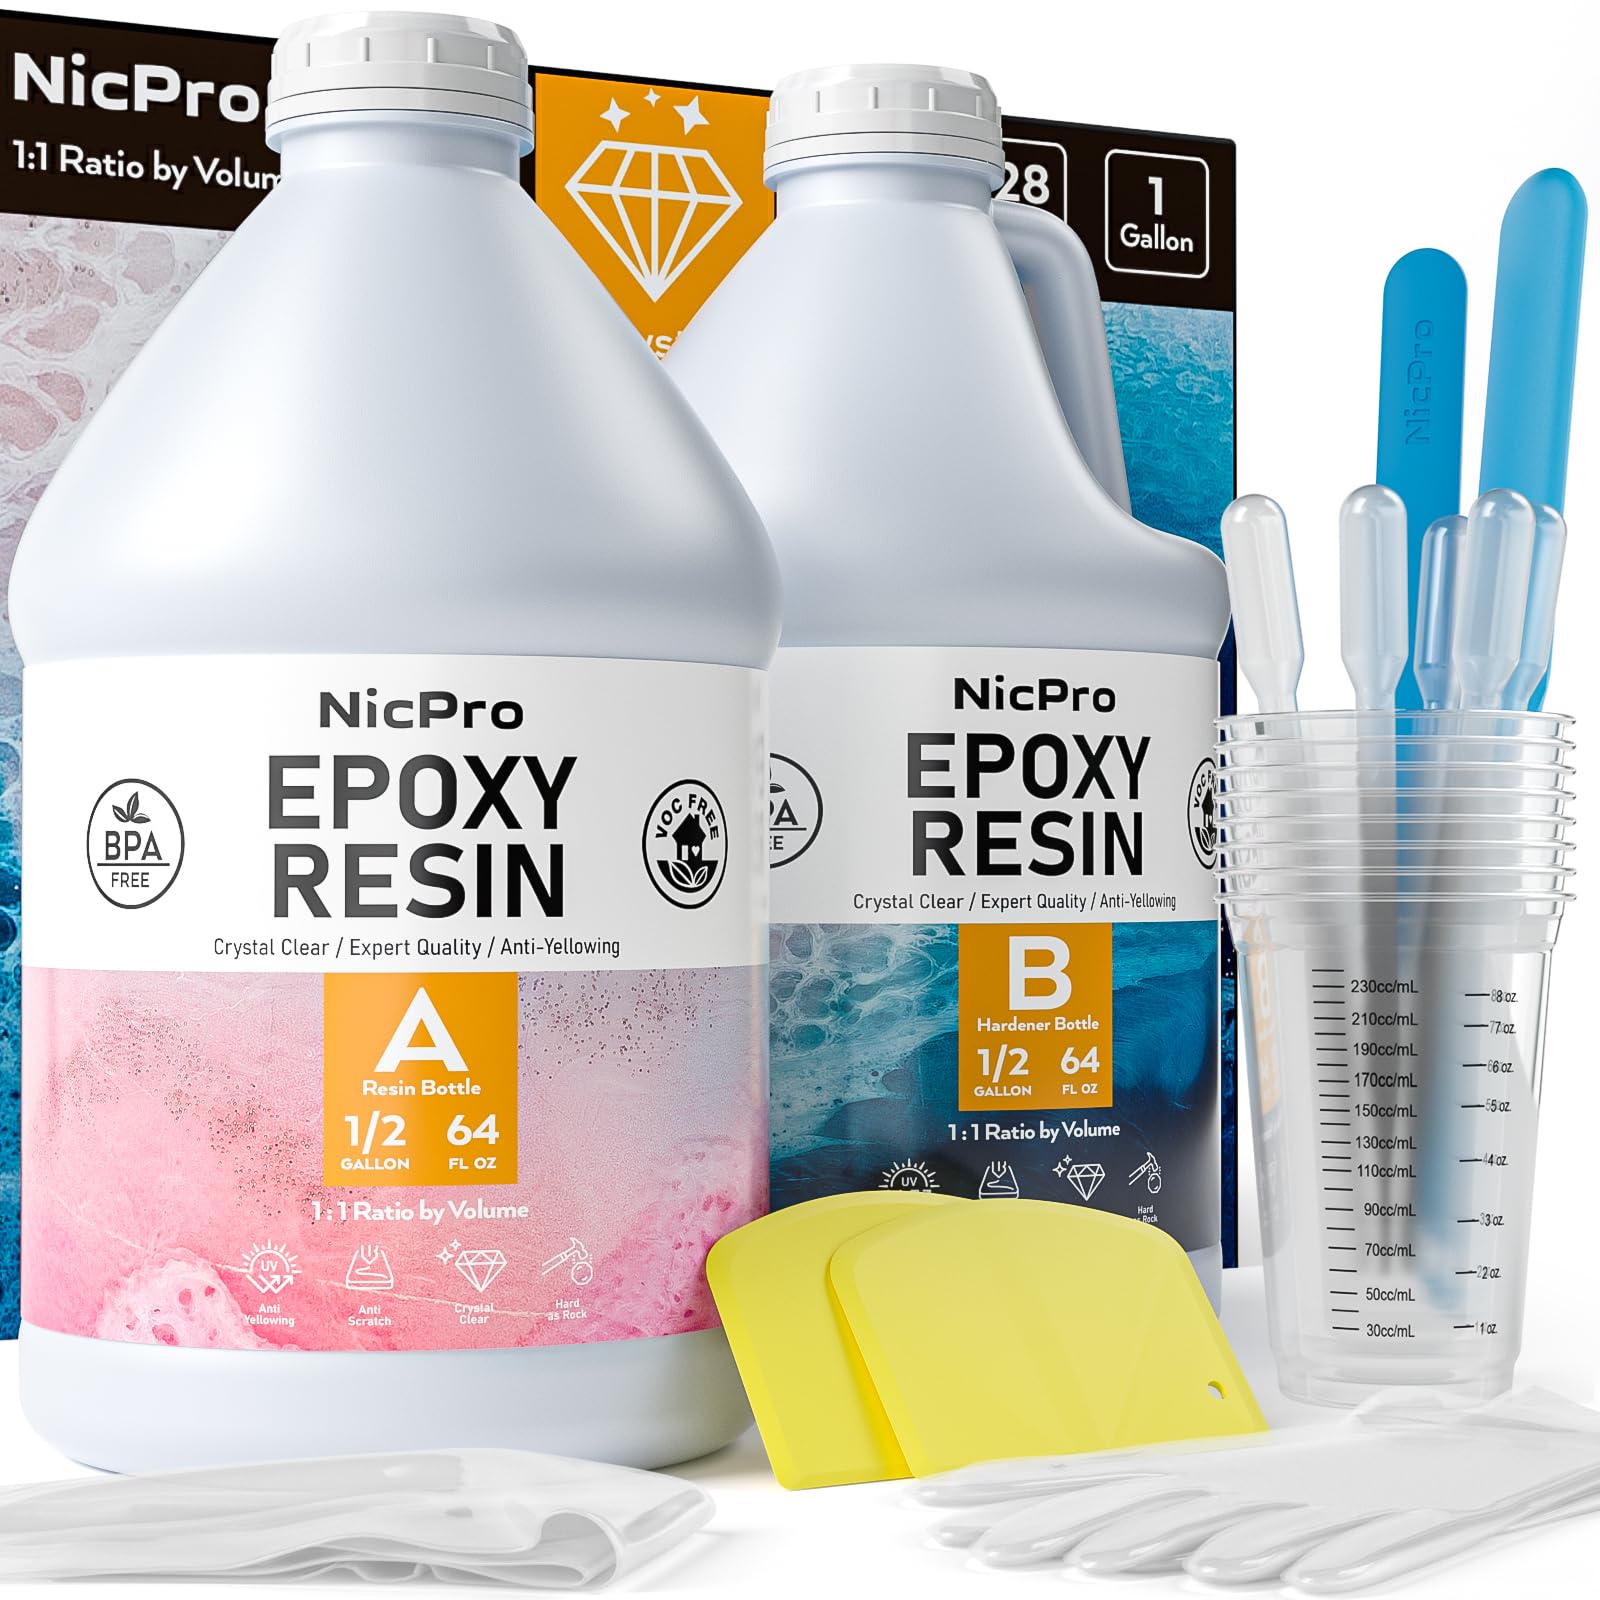 2 Gallon Epoxy Resin Kit - Clear Epoxy Resin for Countertop, Table Top,  Art, Craft, DIY, Wood & Resin Molds (1 Gallon X 2)